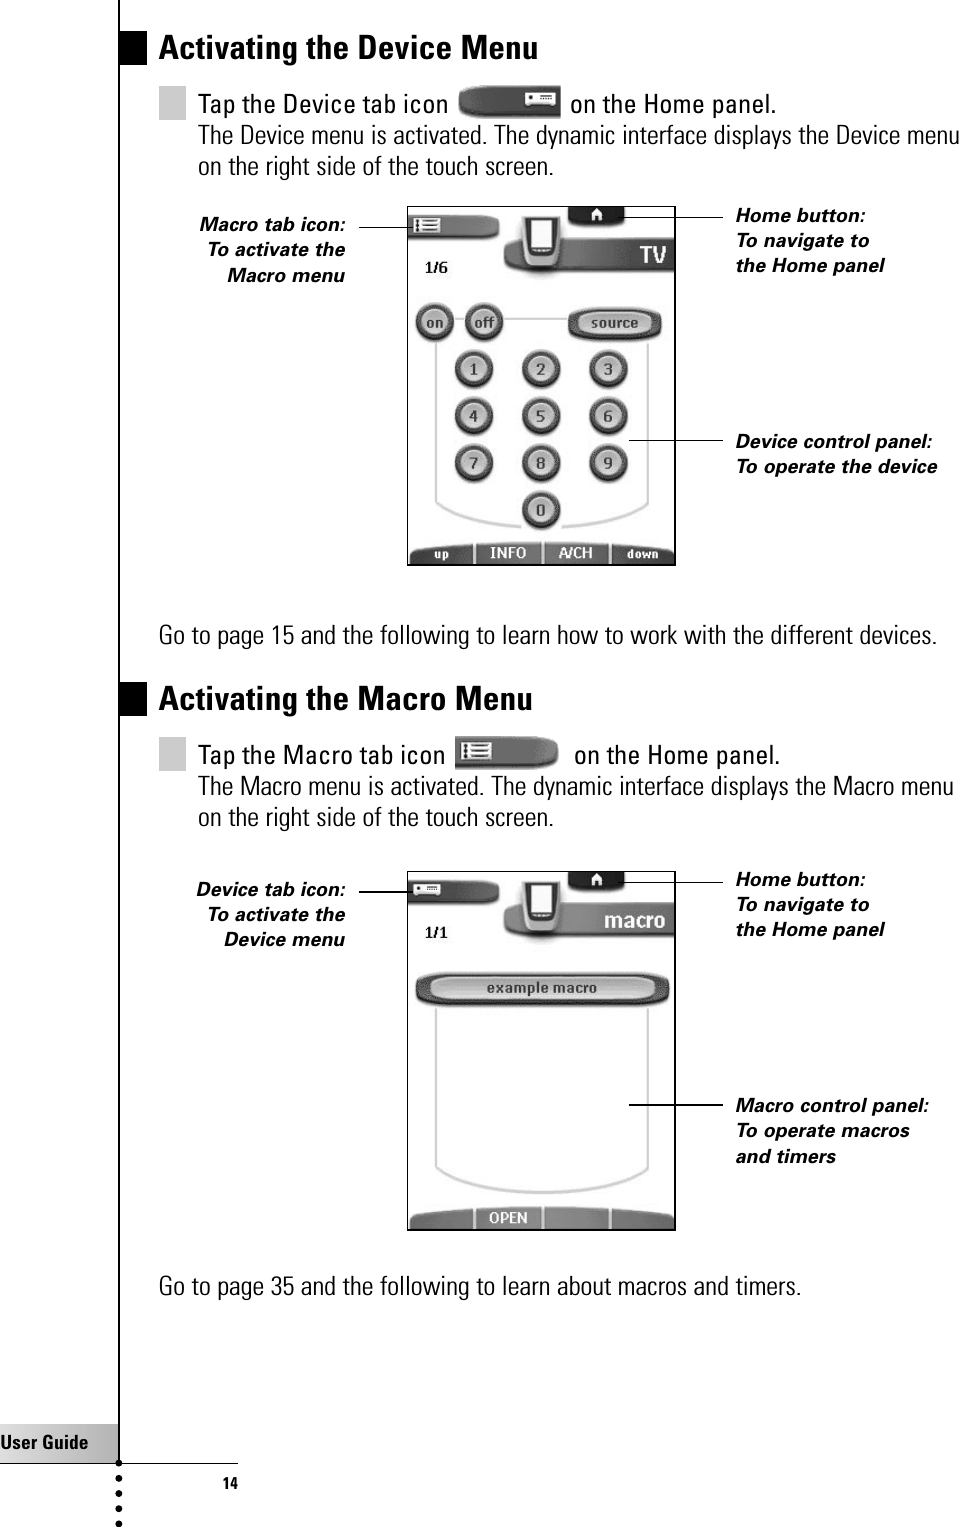 User Guide14Activating the Device MenuTap the Device tab icon  on the Home panel.The Device menu is activated. The dynamic interface displays the Device menuon the right side of the touch screen.Go to page 15 and the following to learn how to work with the different devices.Activating the Macro MenuTap the Macro tab icon  on the Home panel.The Macro menu is activated. The dynamic interface displays the Macro menuon the right side of the touch screen.Go to page 35 and the following to learn about macros and timers.Getting StartedHome button: To navigate tothe Home panelDevice control panel:To operate the deviceMacro tab icon:To activate theMacro menuHome button: To navigate tothe Home panelMacro control panel:To operate macrosand timersDevice tab icon:To activate theDevice menu